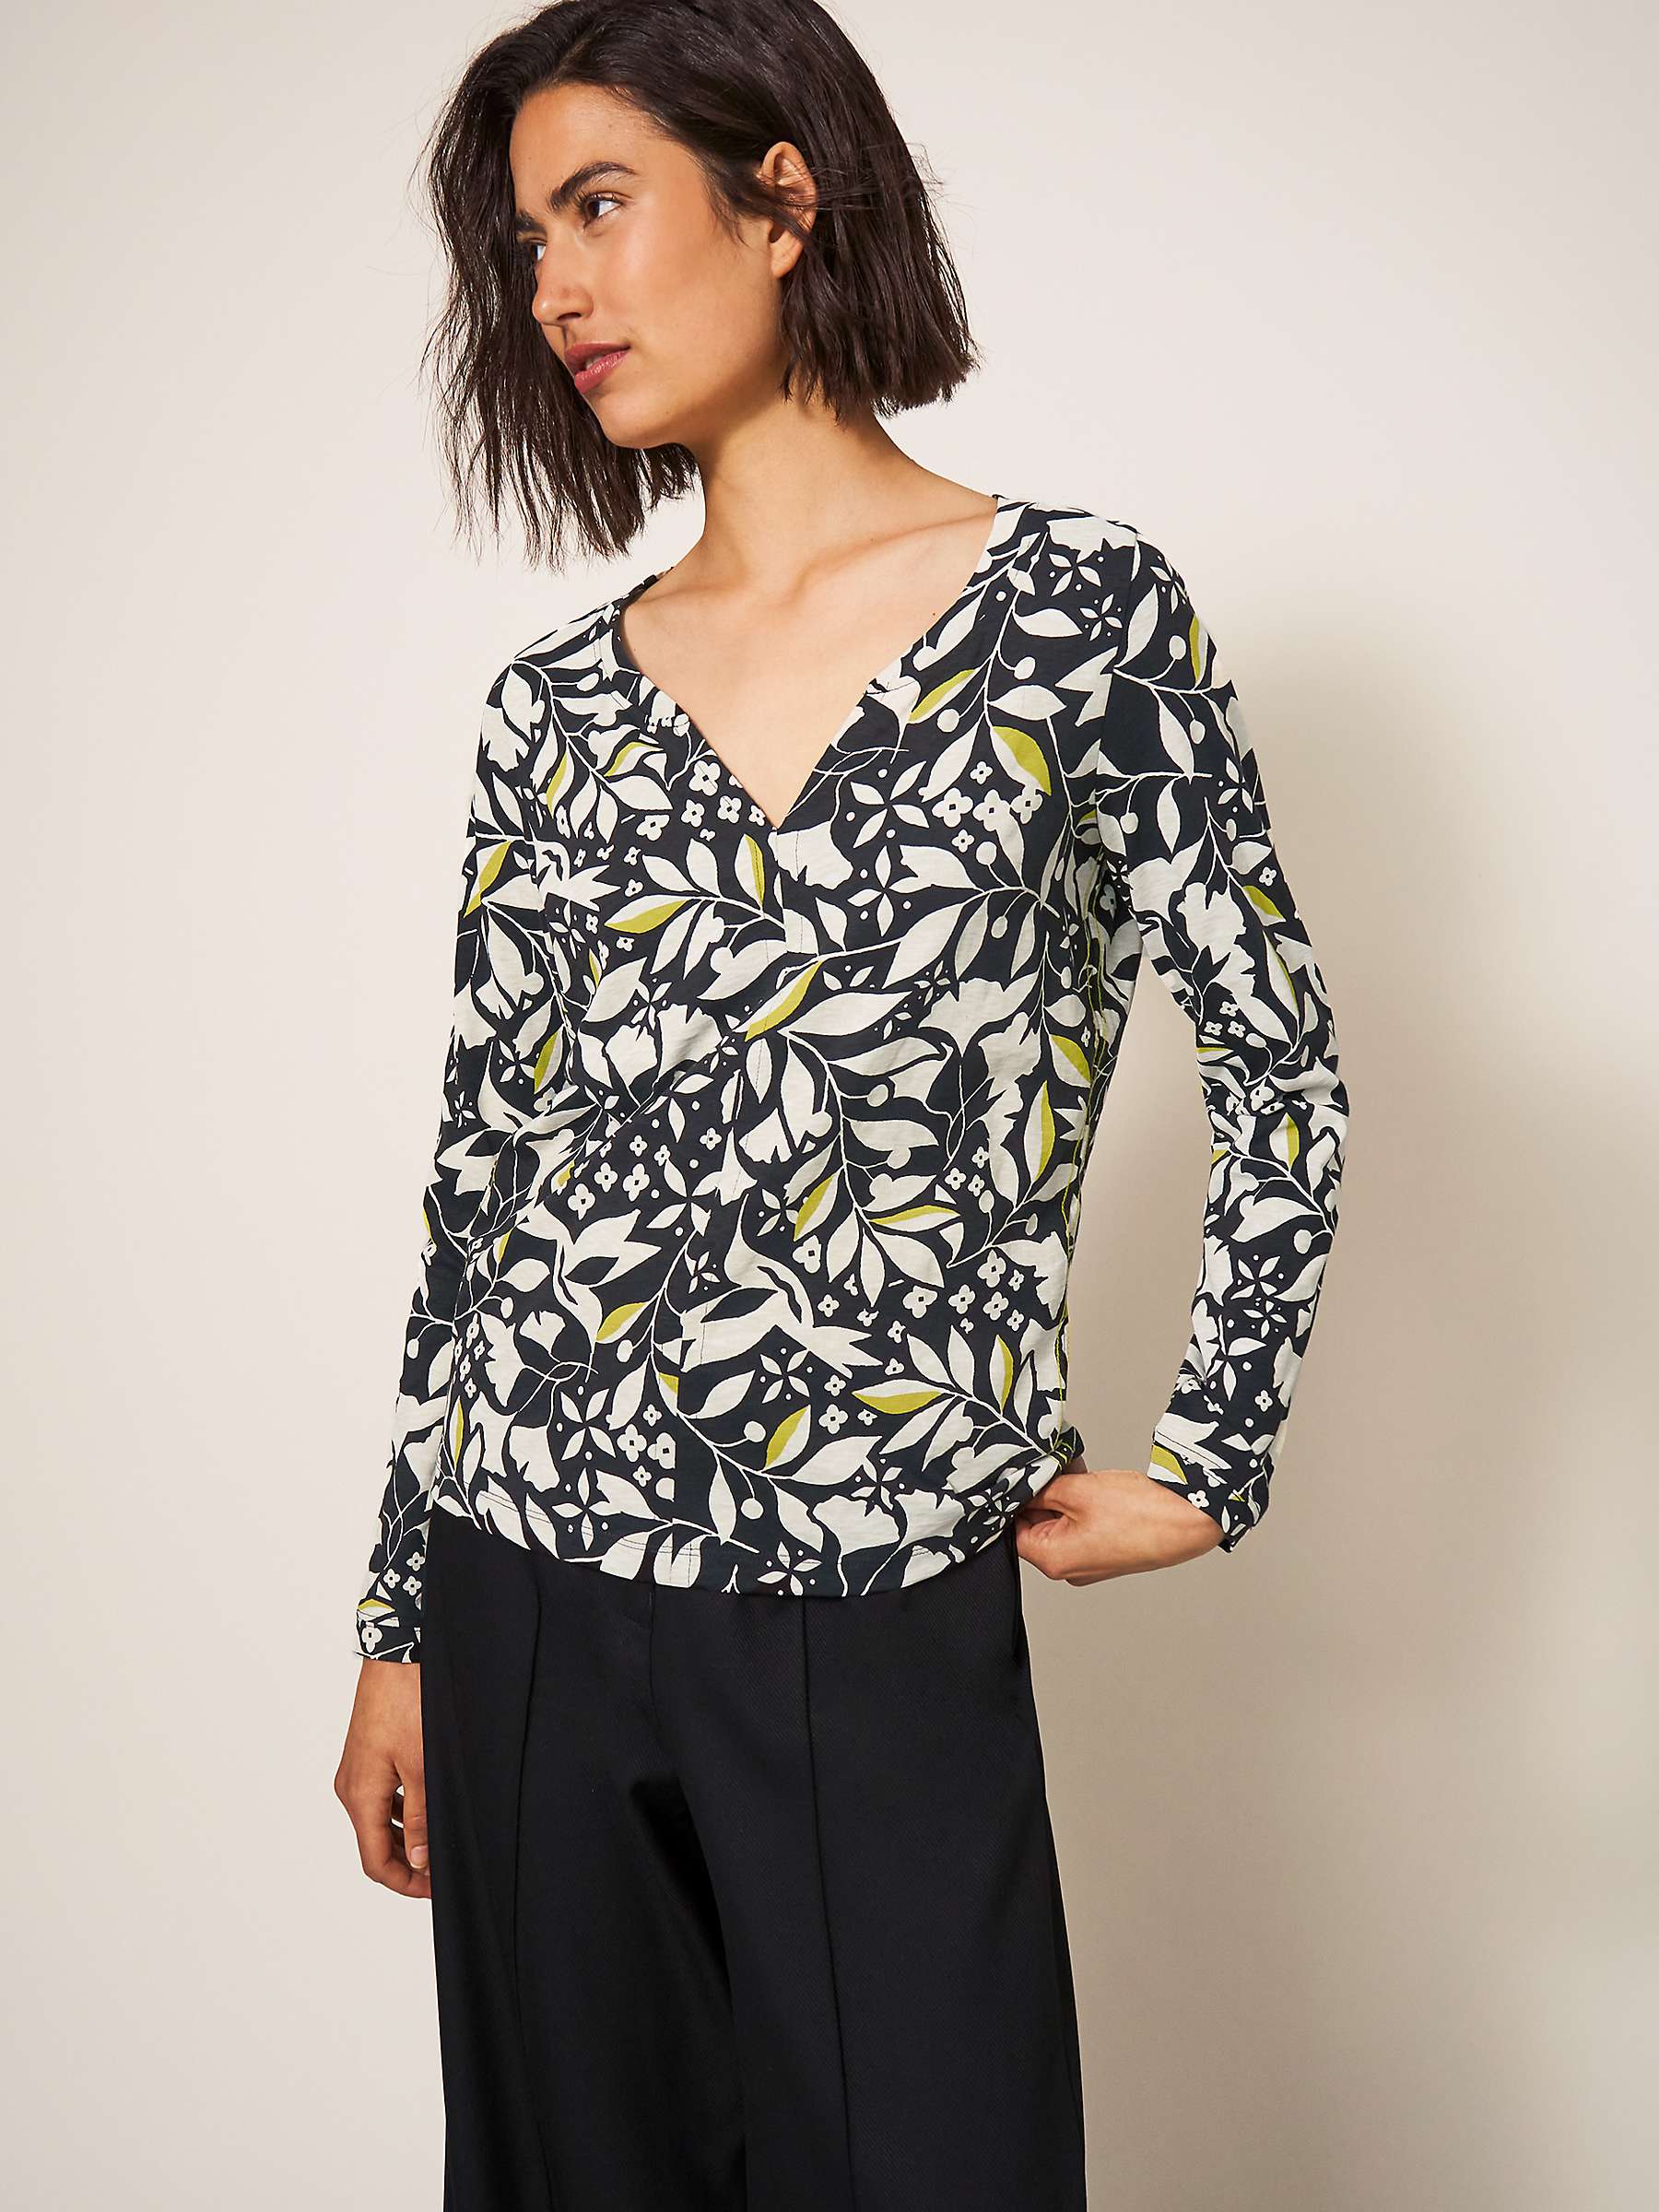 Buy White Stuff Nelly Long Sleeve Floral T-Shirt, Black/Multi Online at johnlewis.com